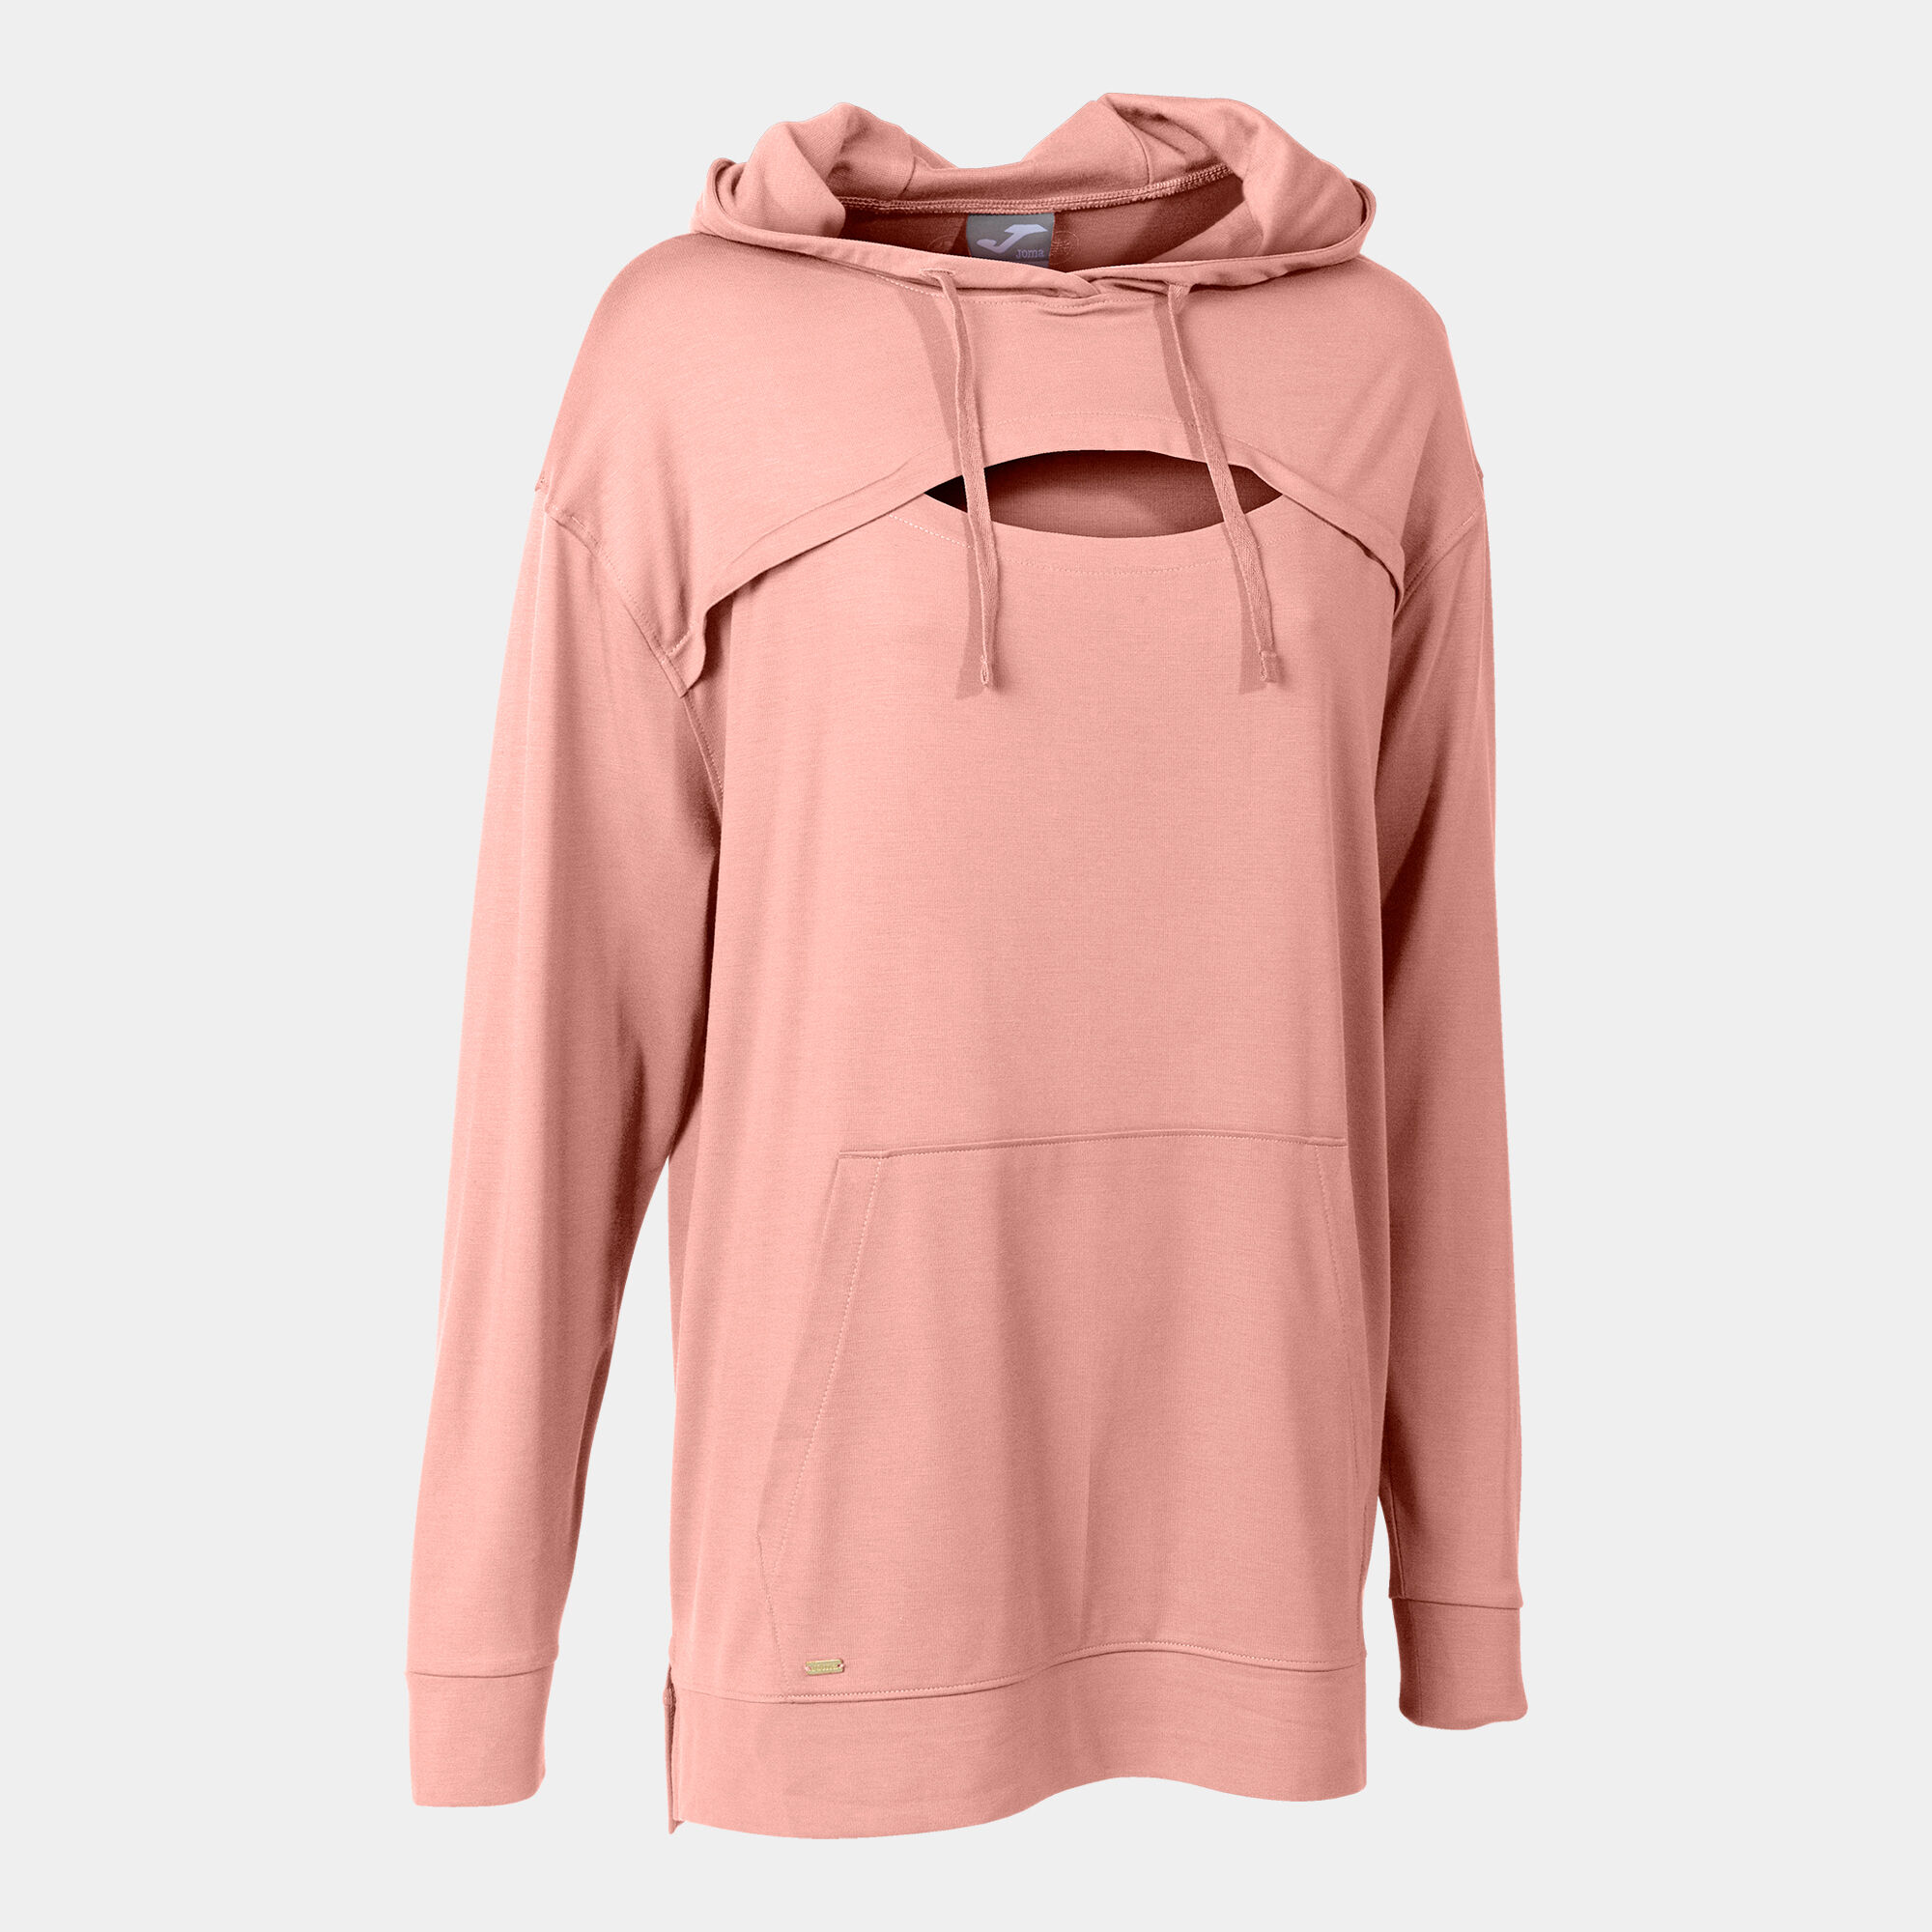 Hooded sweater woman Breath pink